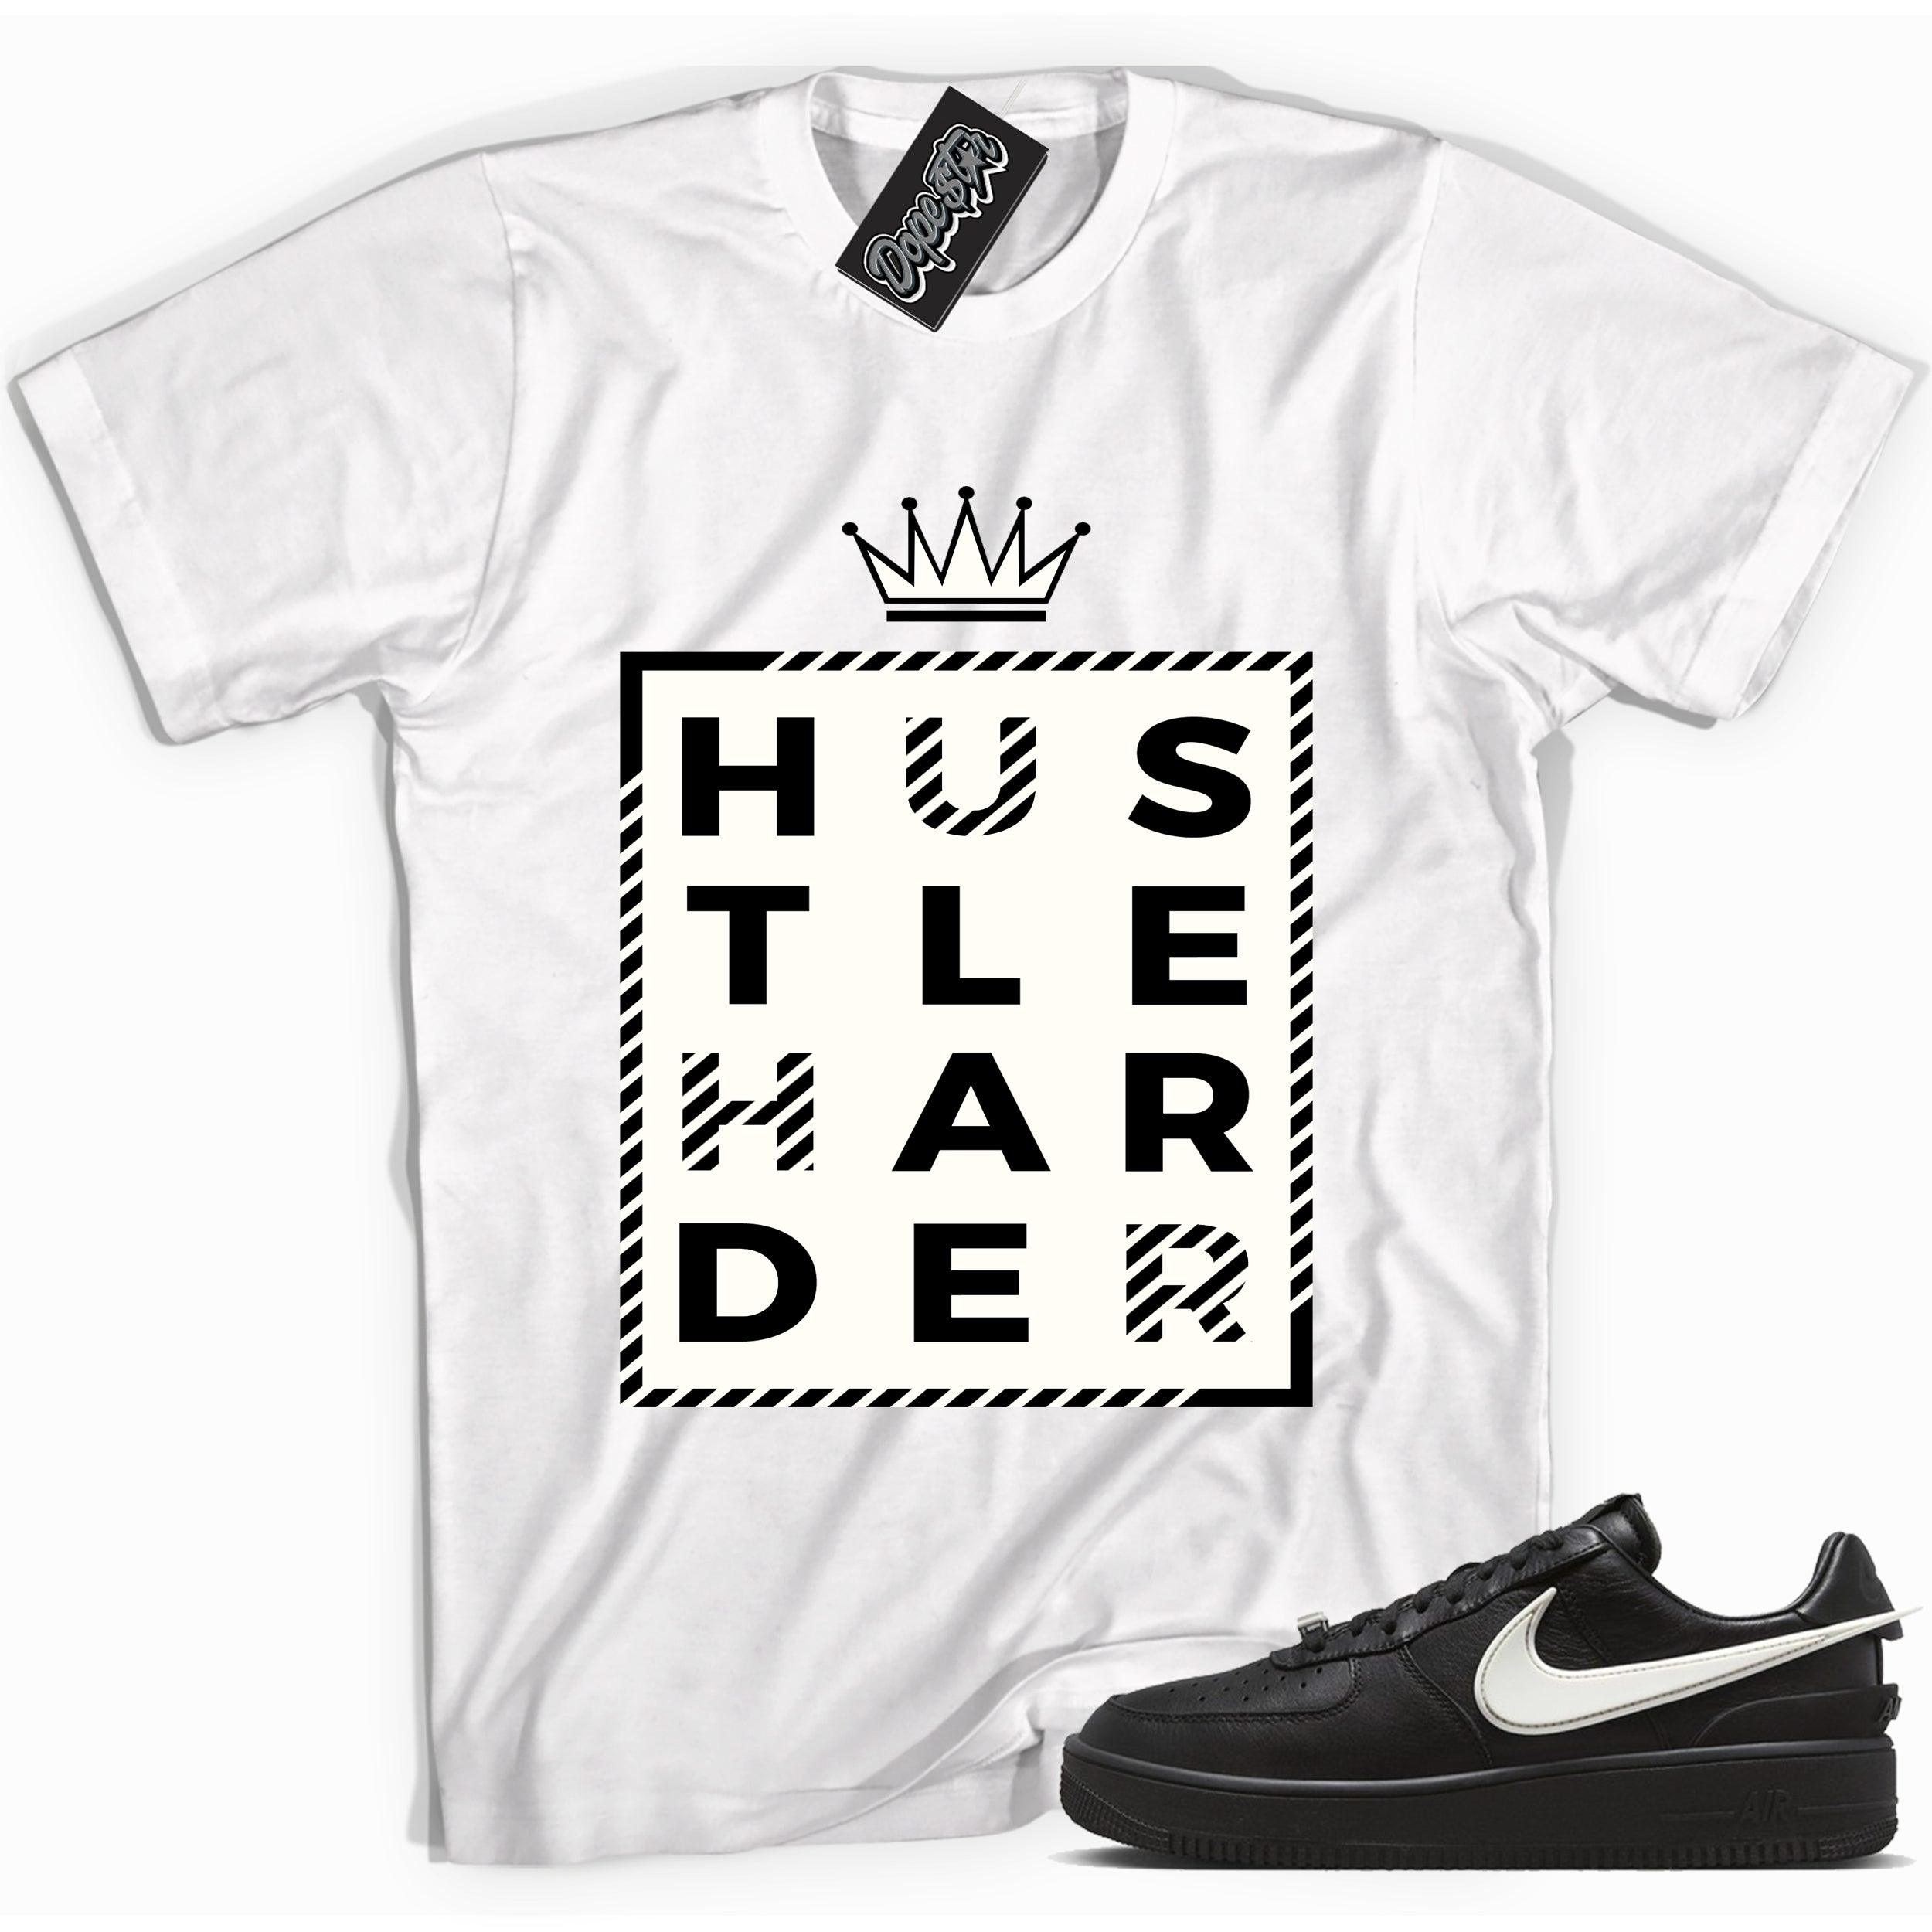 Cool white graphic tee with 'hustle harder' print, that perfectly matches Nike Air Force 1 Low SP Ambush Phantom sneakers.